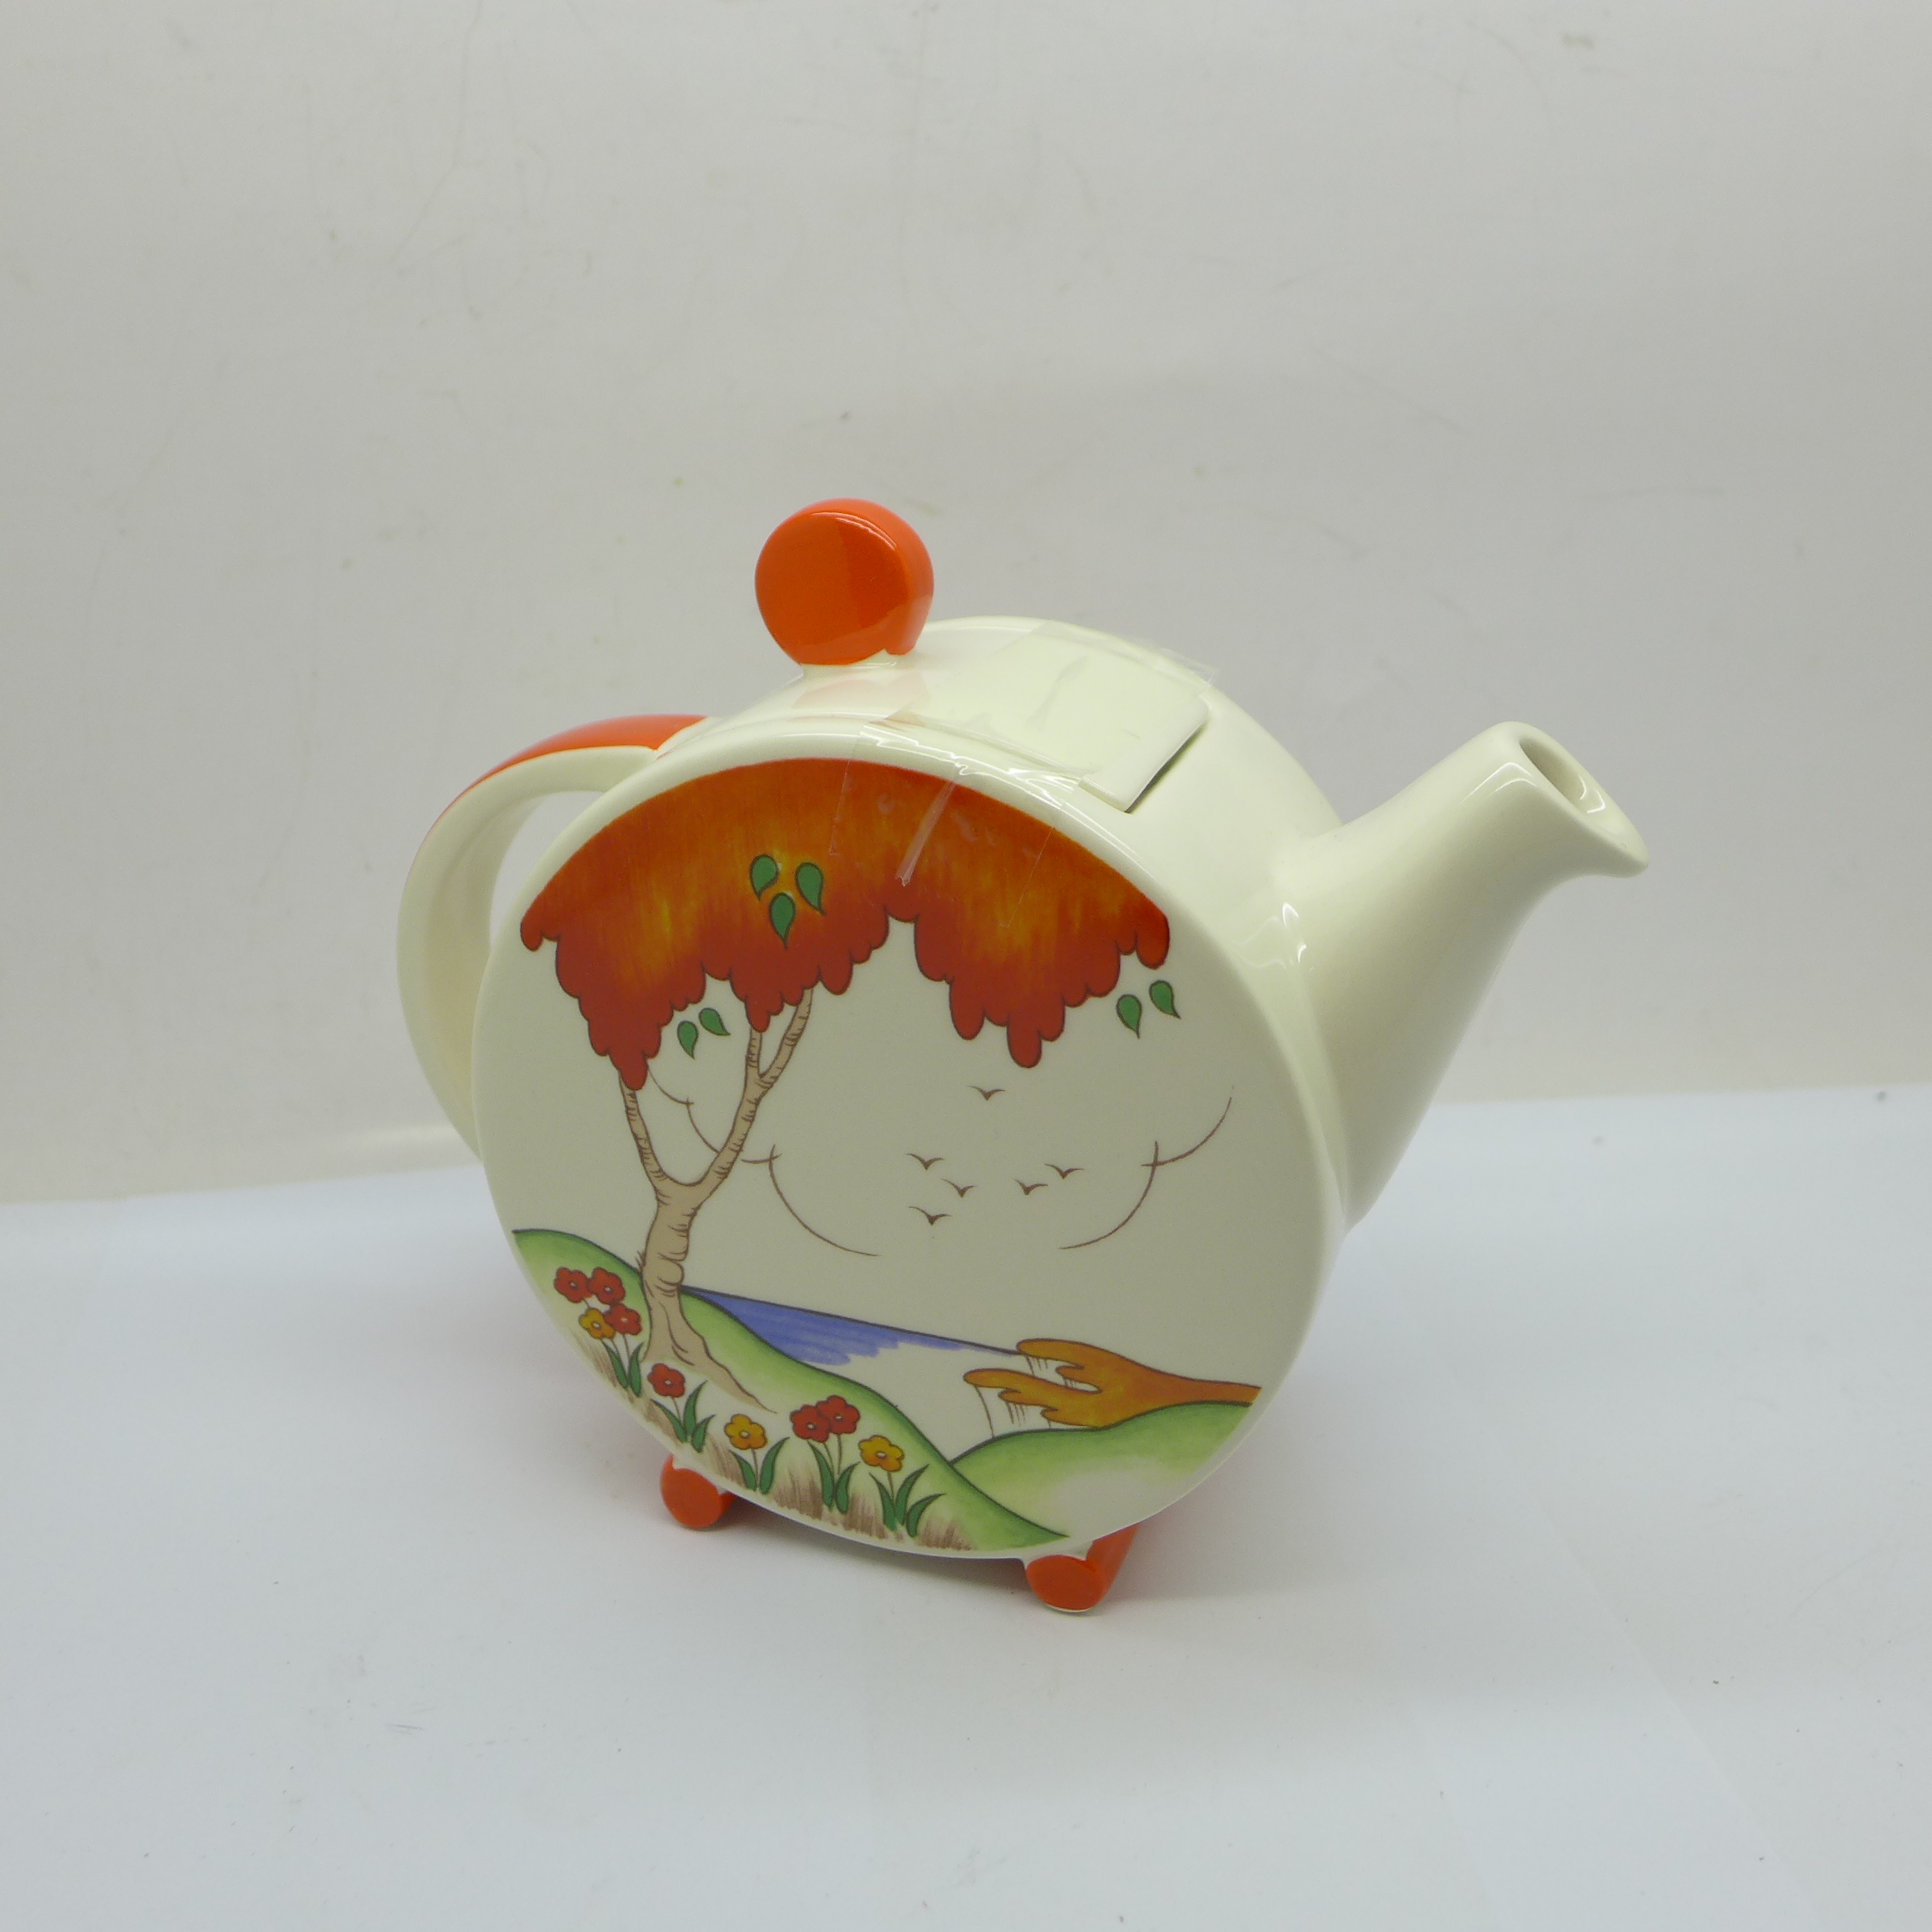 A Wedgwood limited edition Clarice Cliff teapot in the Orange Taormina design, number 73 of 100, H: